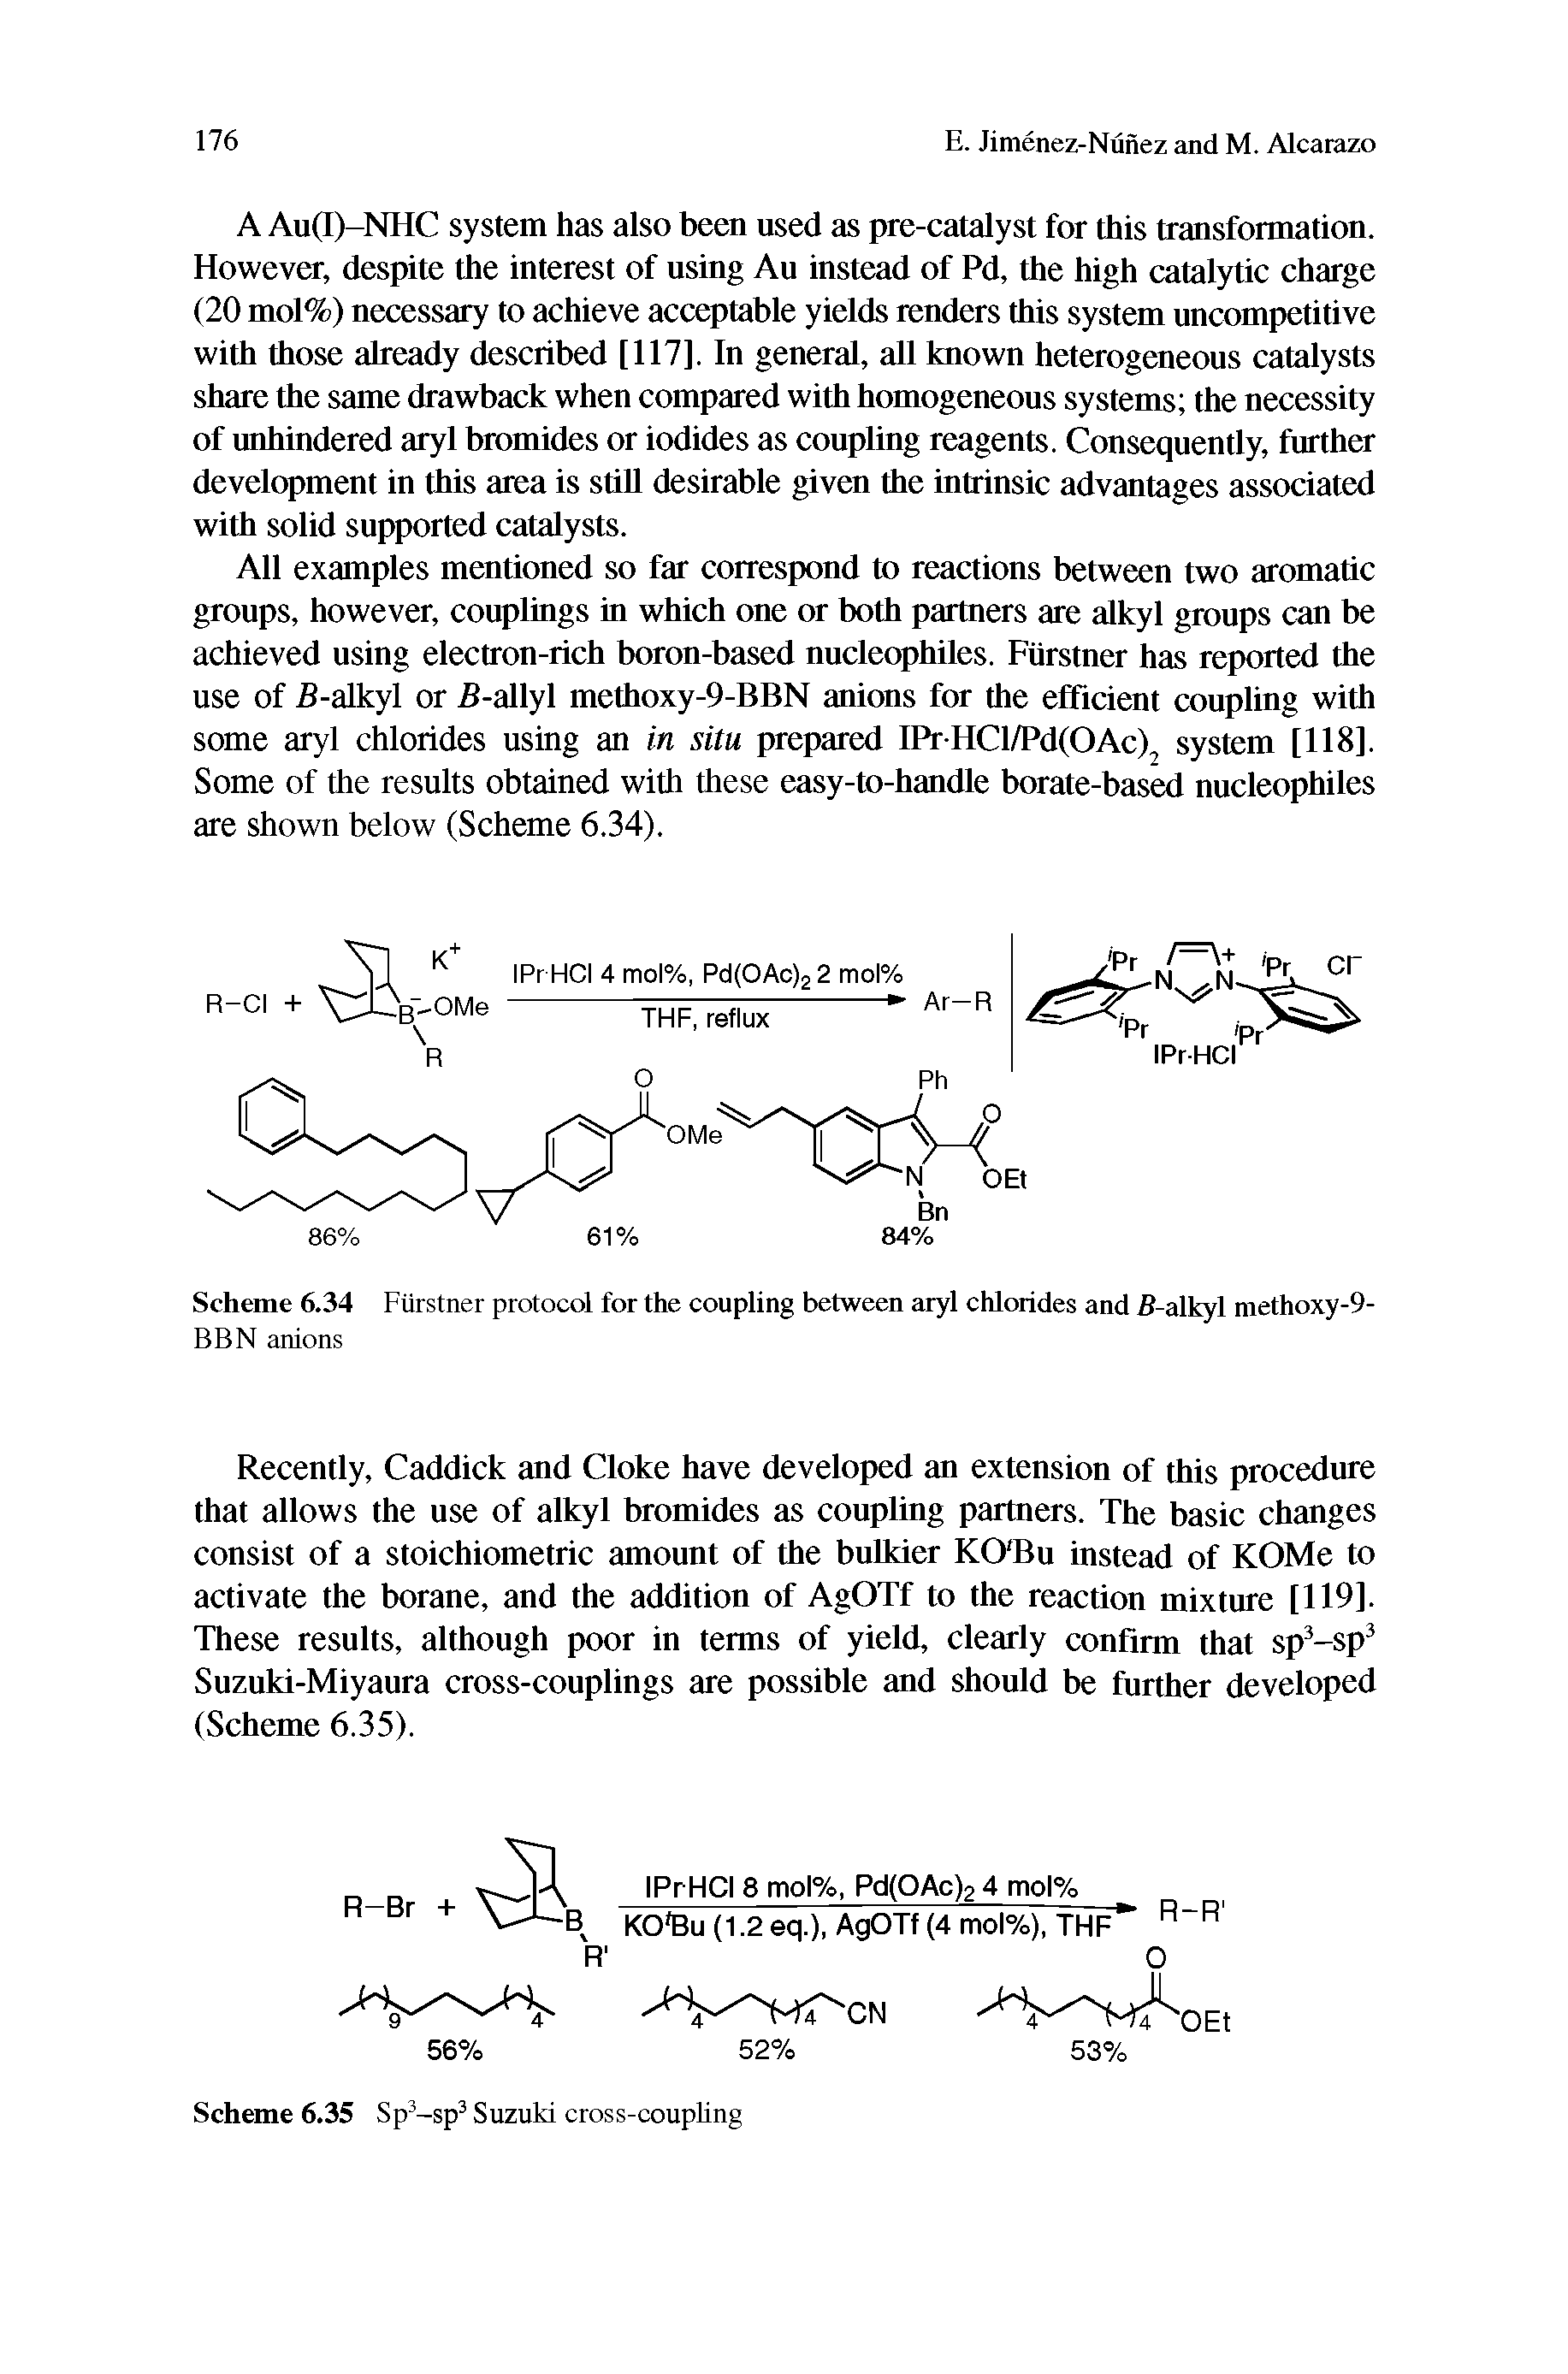 Scheme 6.34 Fiirstner protocol for the coupling between aryl chlorides and 5-alkyl methoxy-9-...